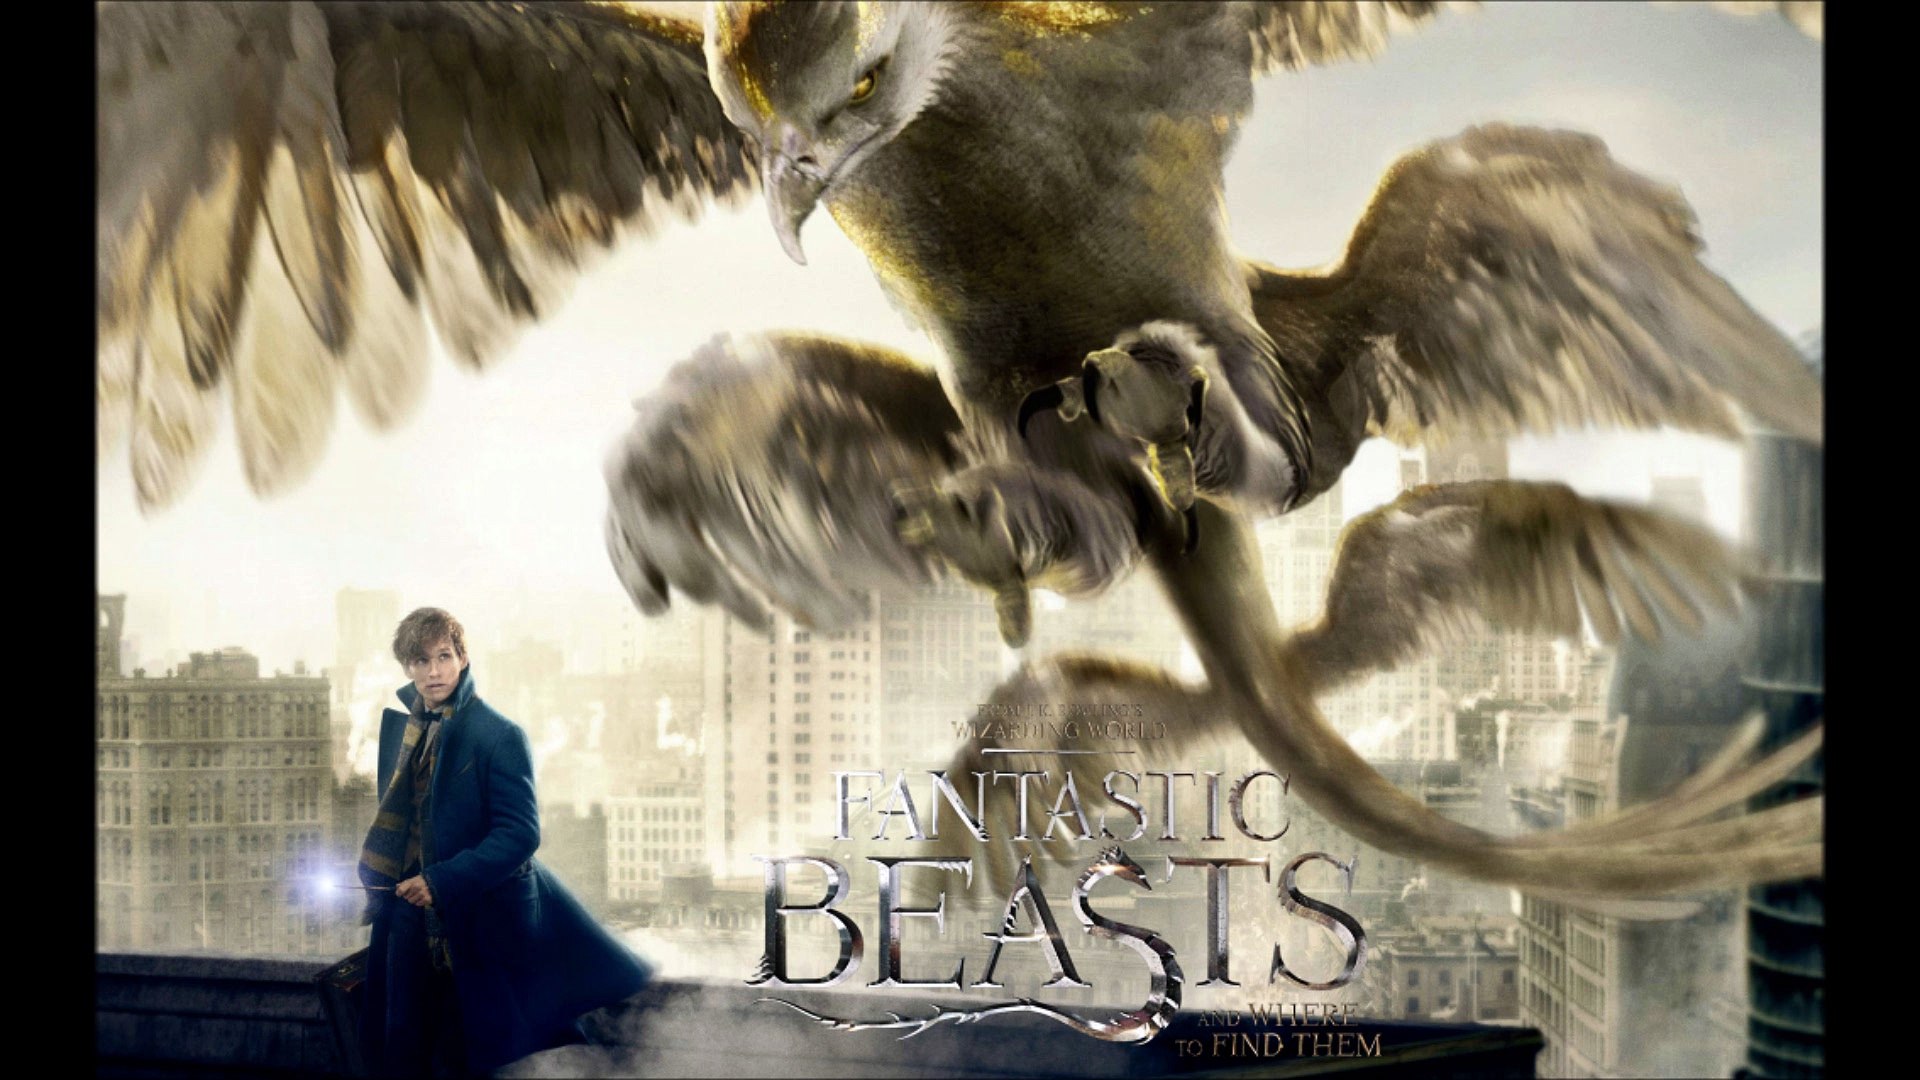 Fantastic Beast and where to find them - Newt releases the Thunderbird